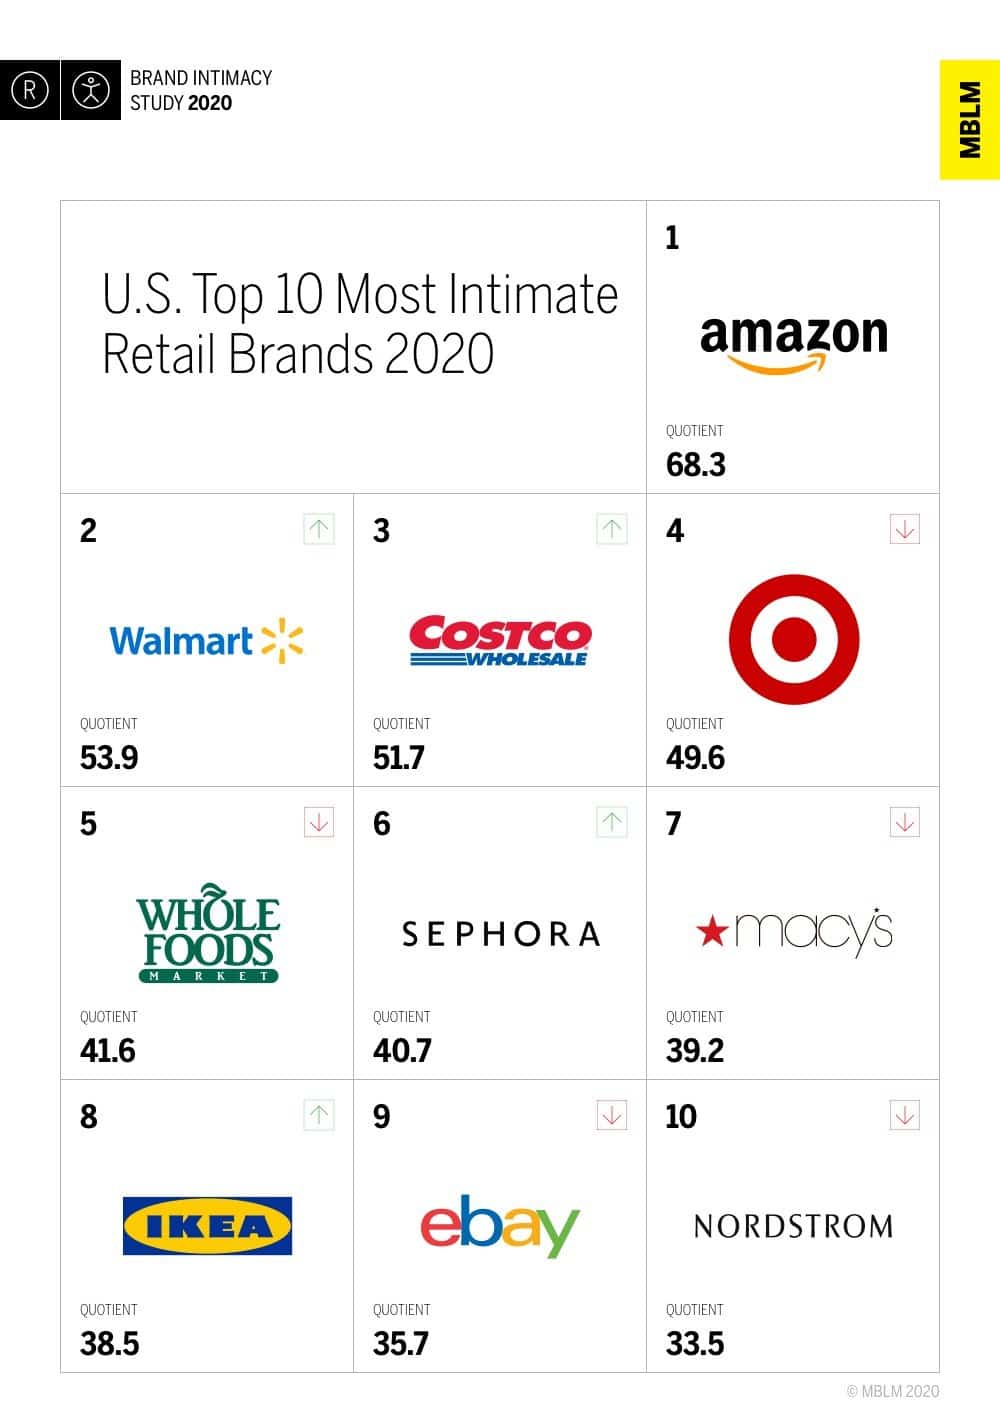 Powered by Amazon, retail ranks high in brand intimacy